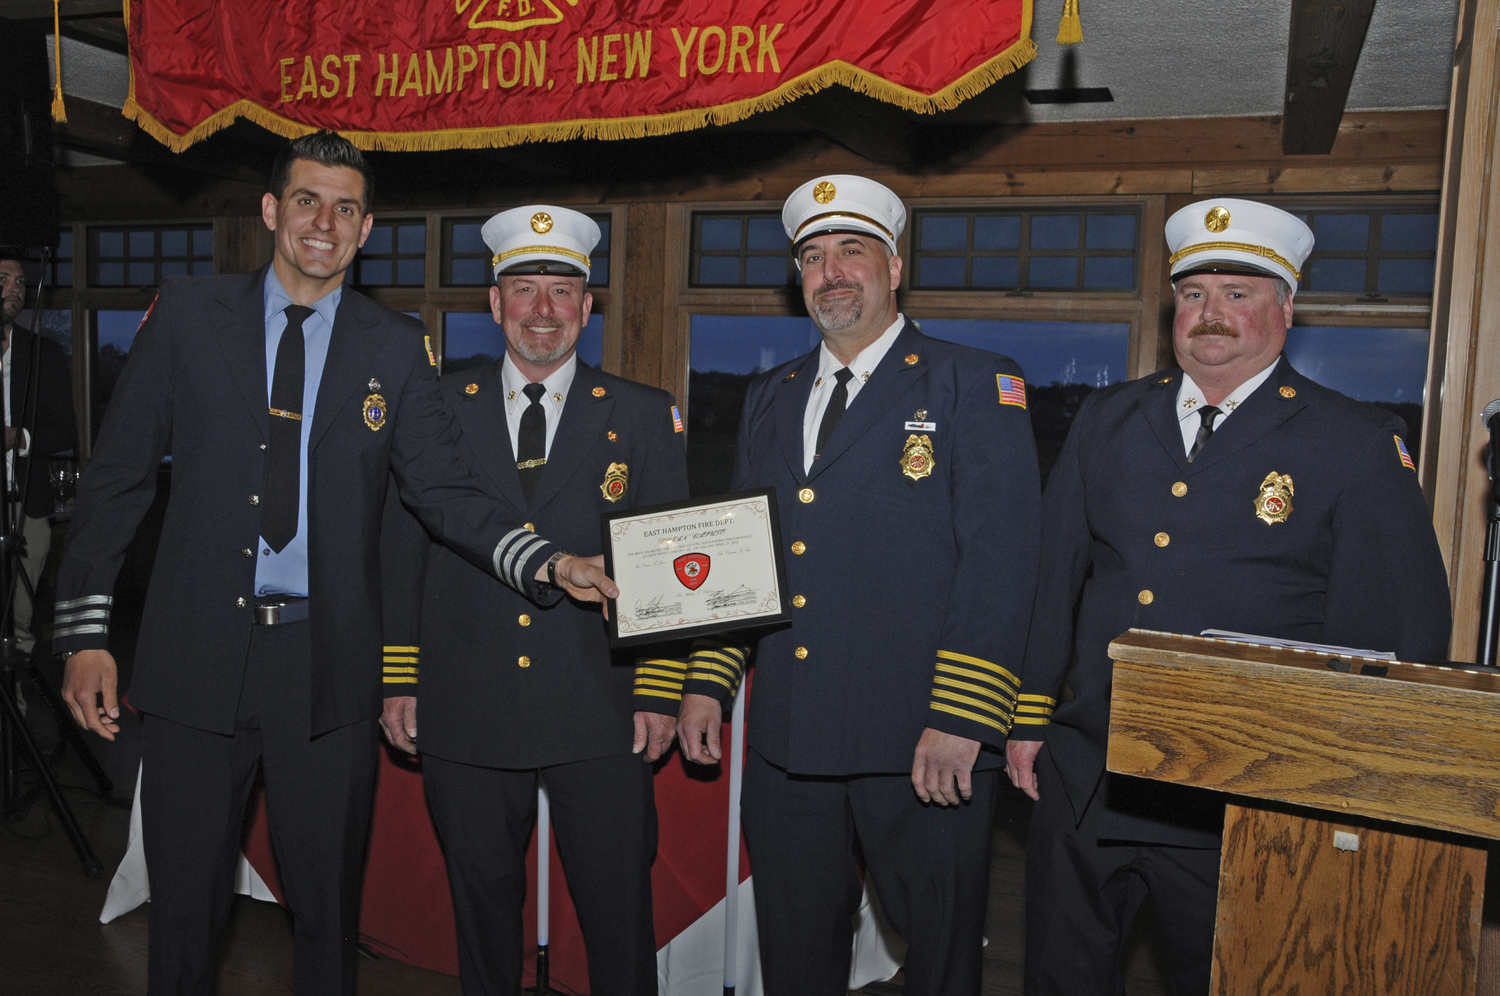 Brian Stanis,Captain of Company No. 2, with the Officer of the Year Award 2023 at the East Hampton Fire Department's 125th Annual Inspection Dinner at the Maidstone Club on Saturday.  RICHARD LEWIN